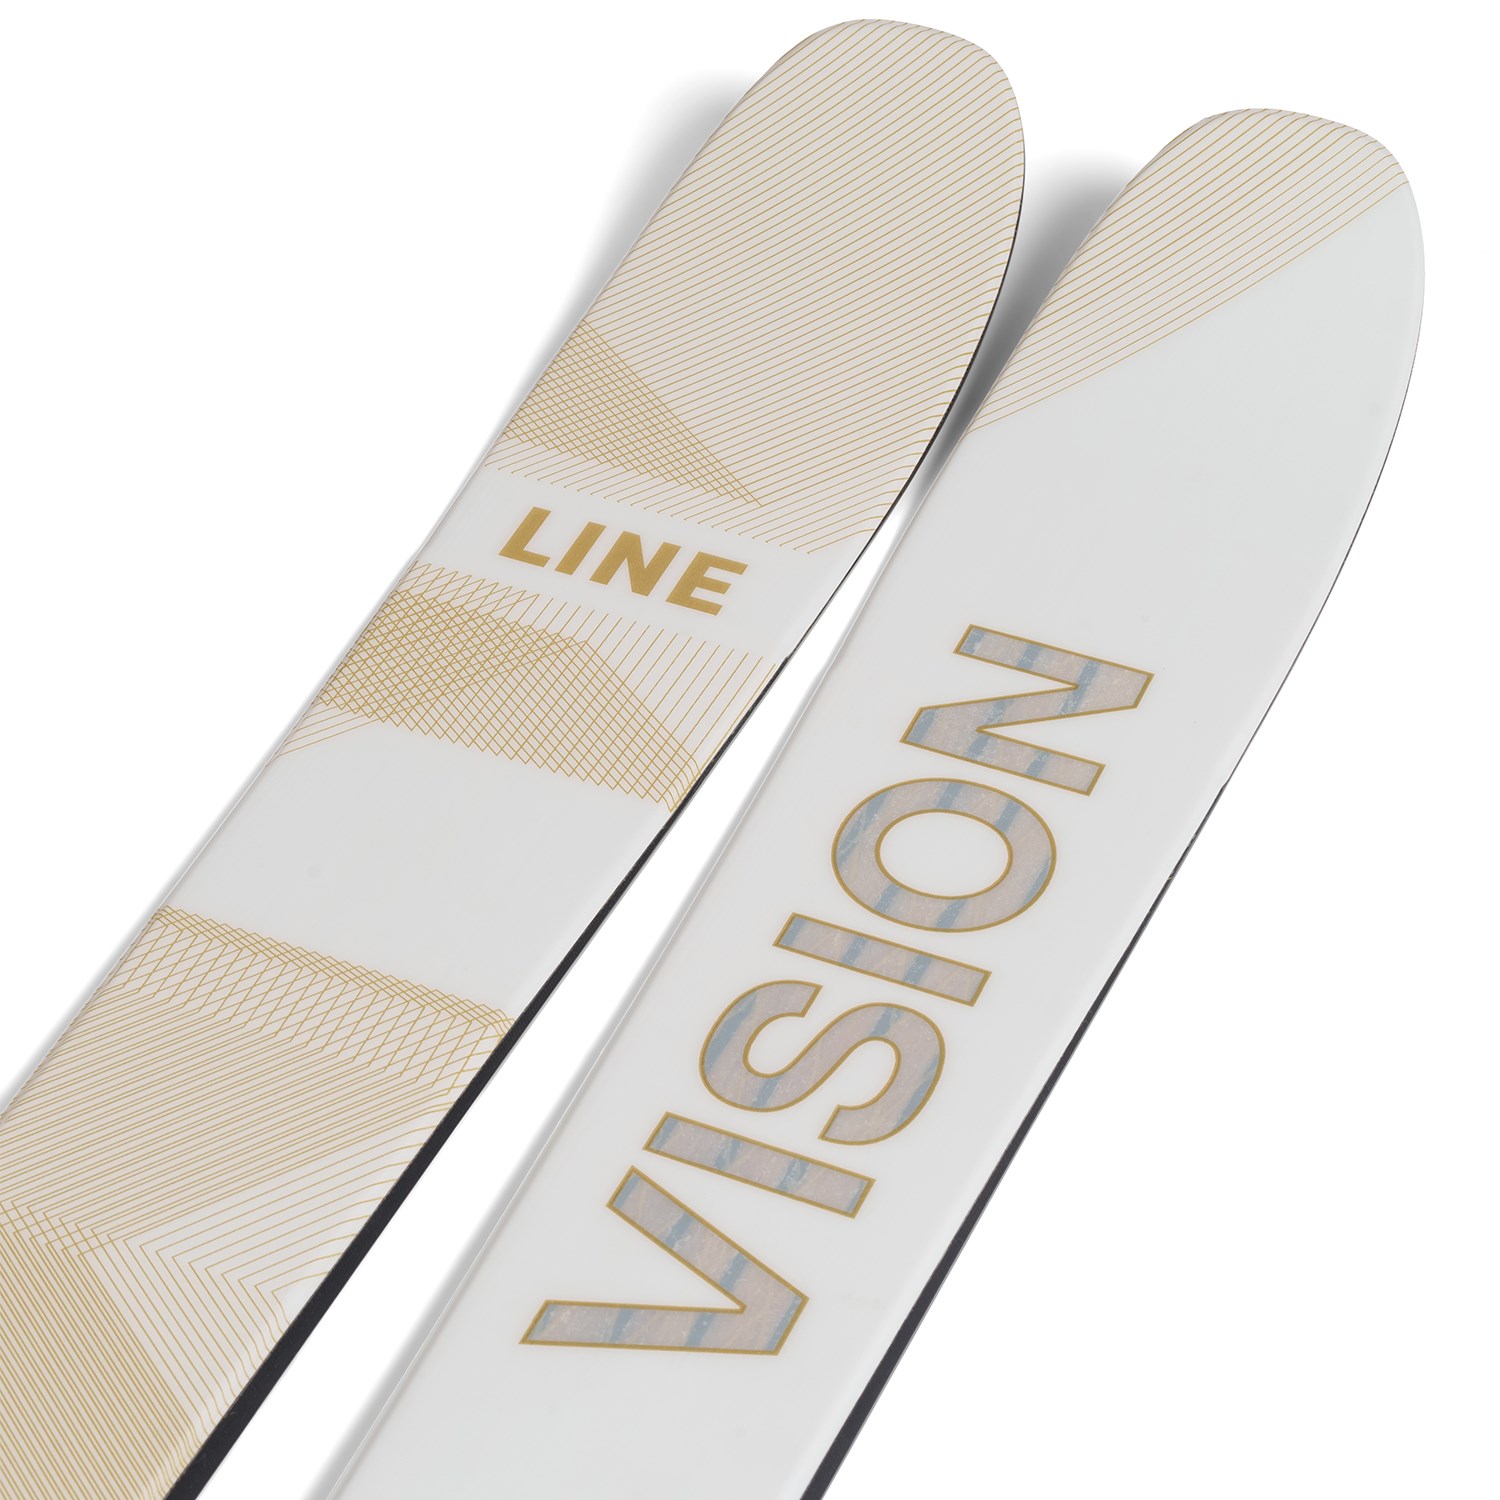 Line Vision 98 Skis | The BackCountry in Truckee, CA